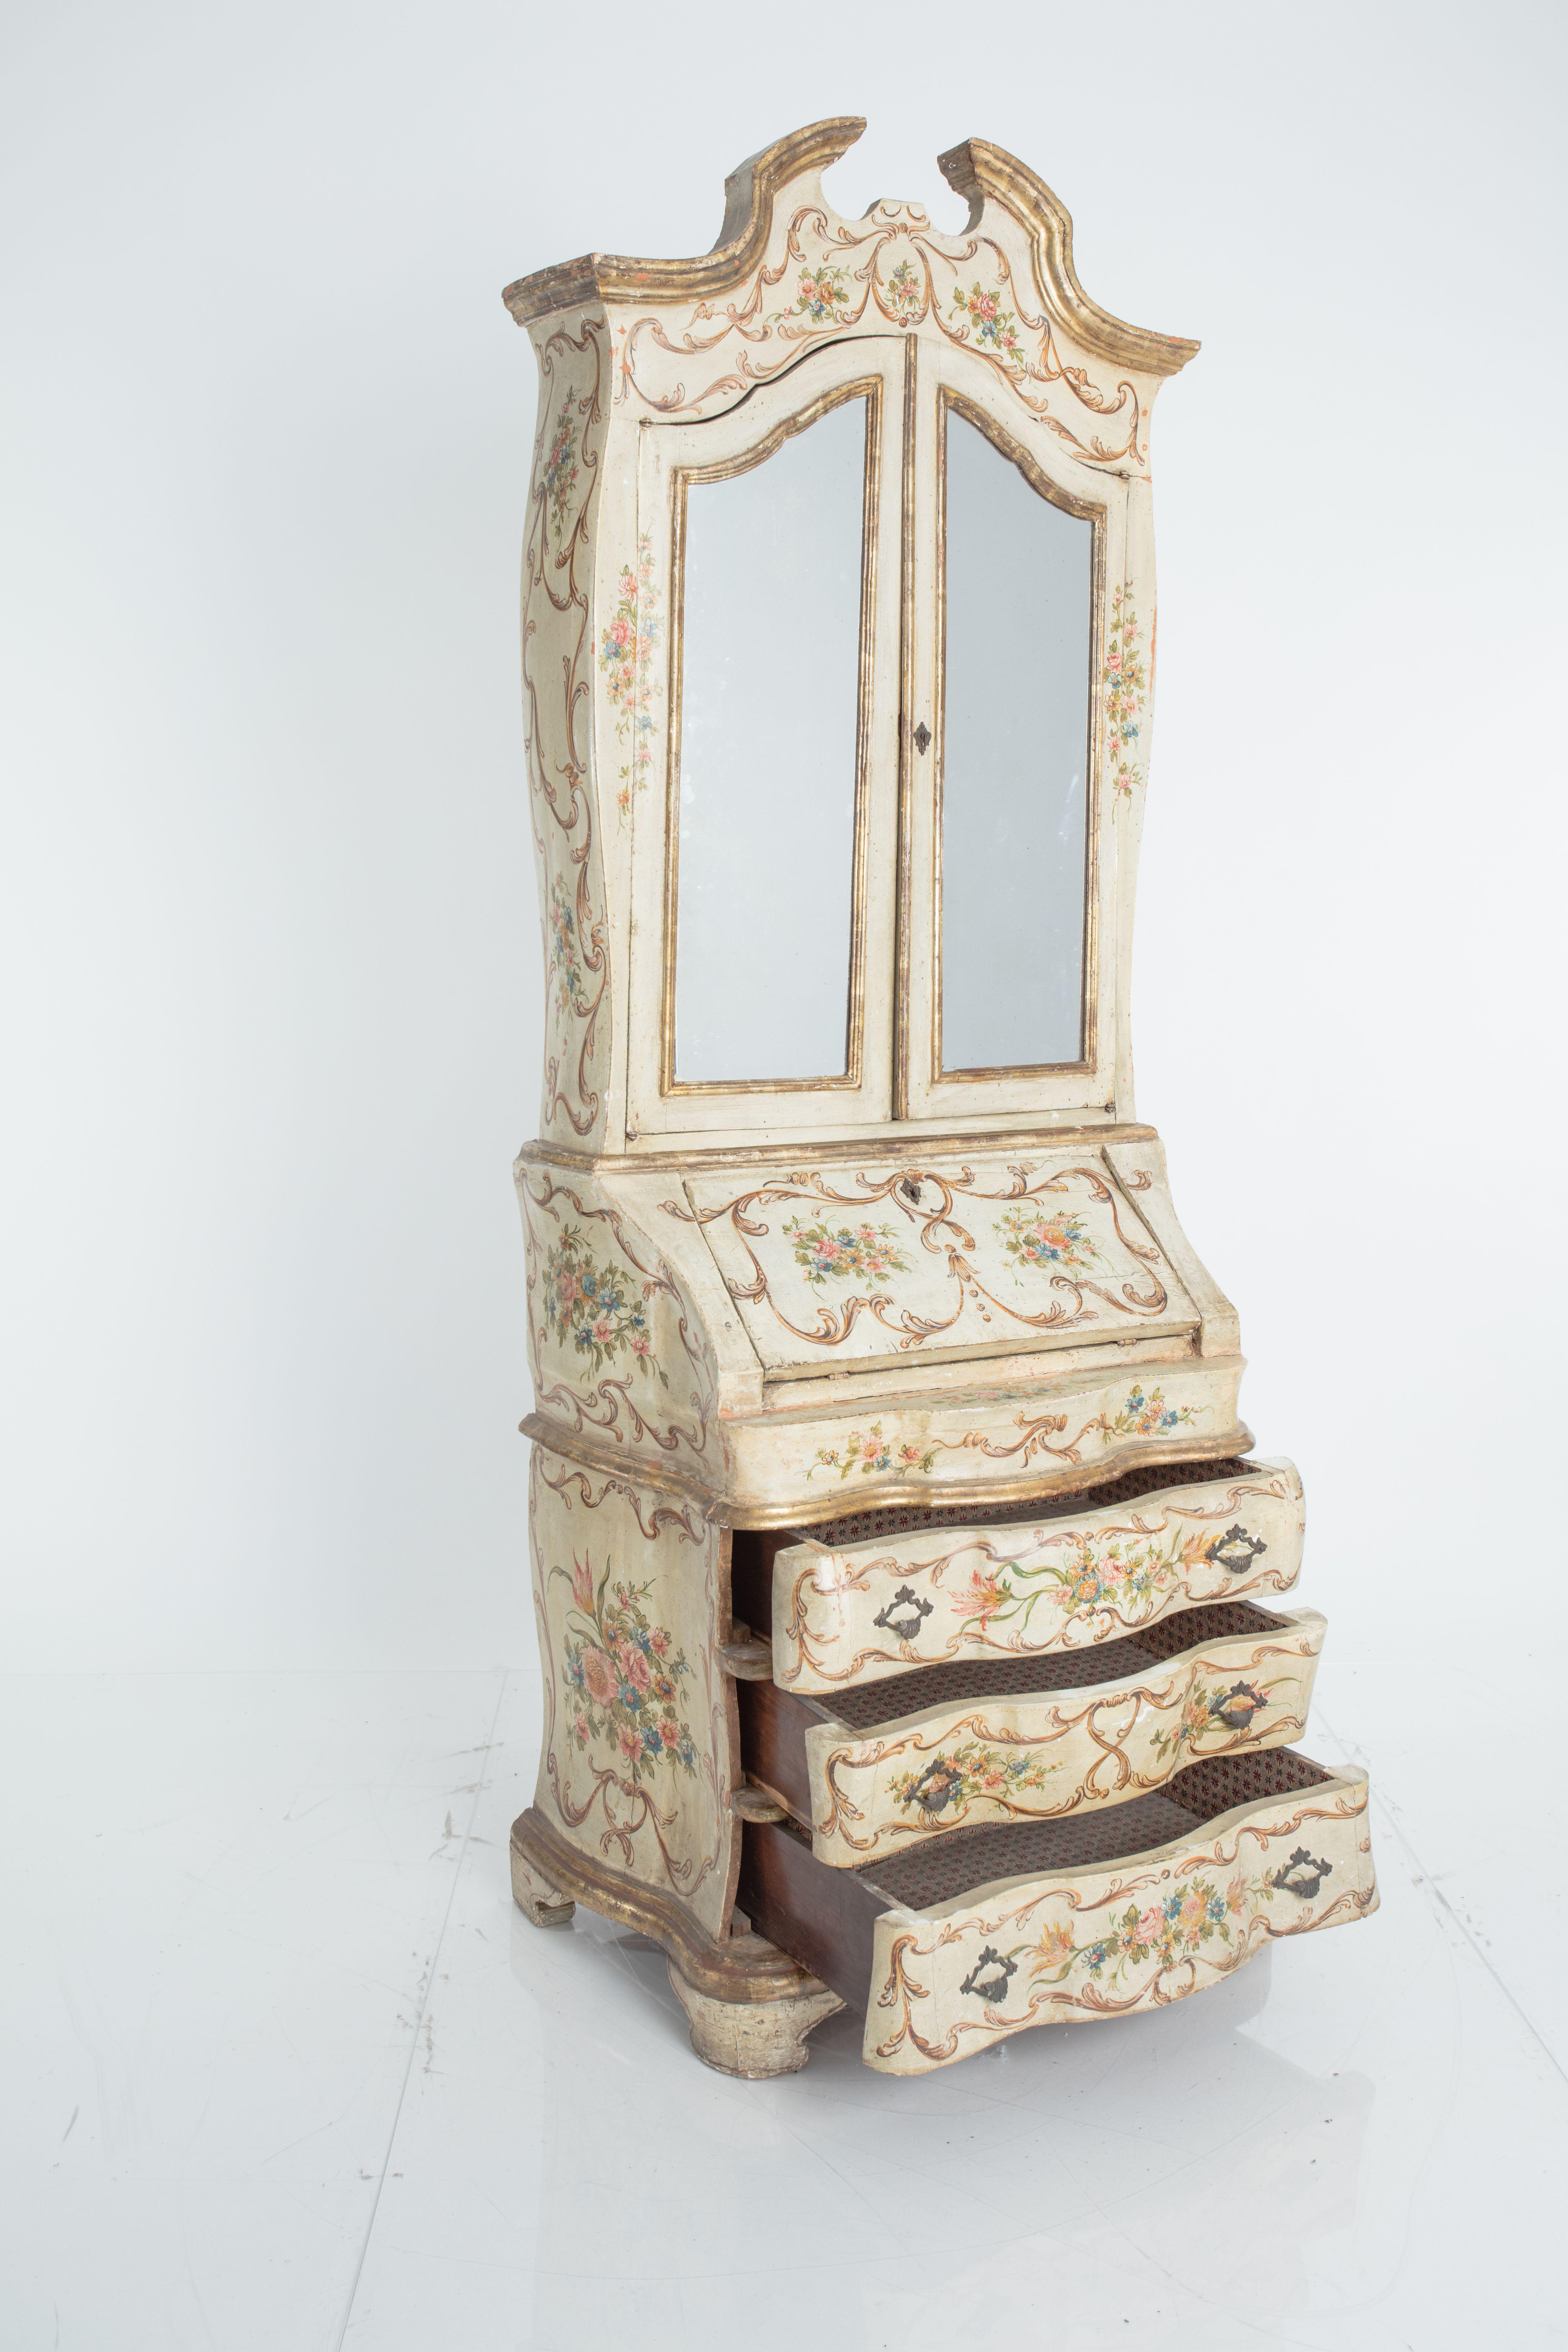 19th Century Antique Rococo Style Venetian Secretary Cabinet with Gilt and Floral Motif